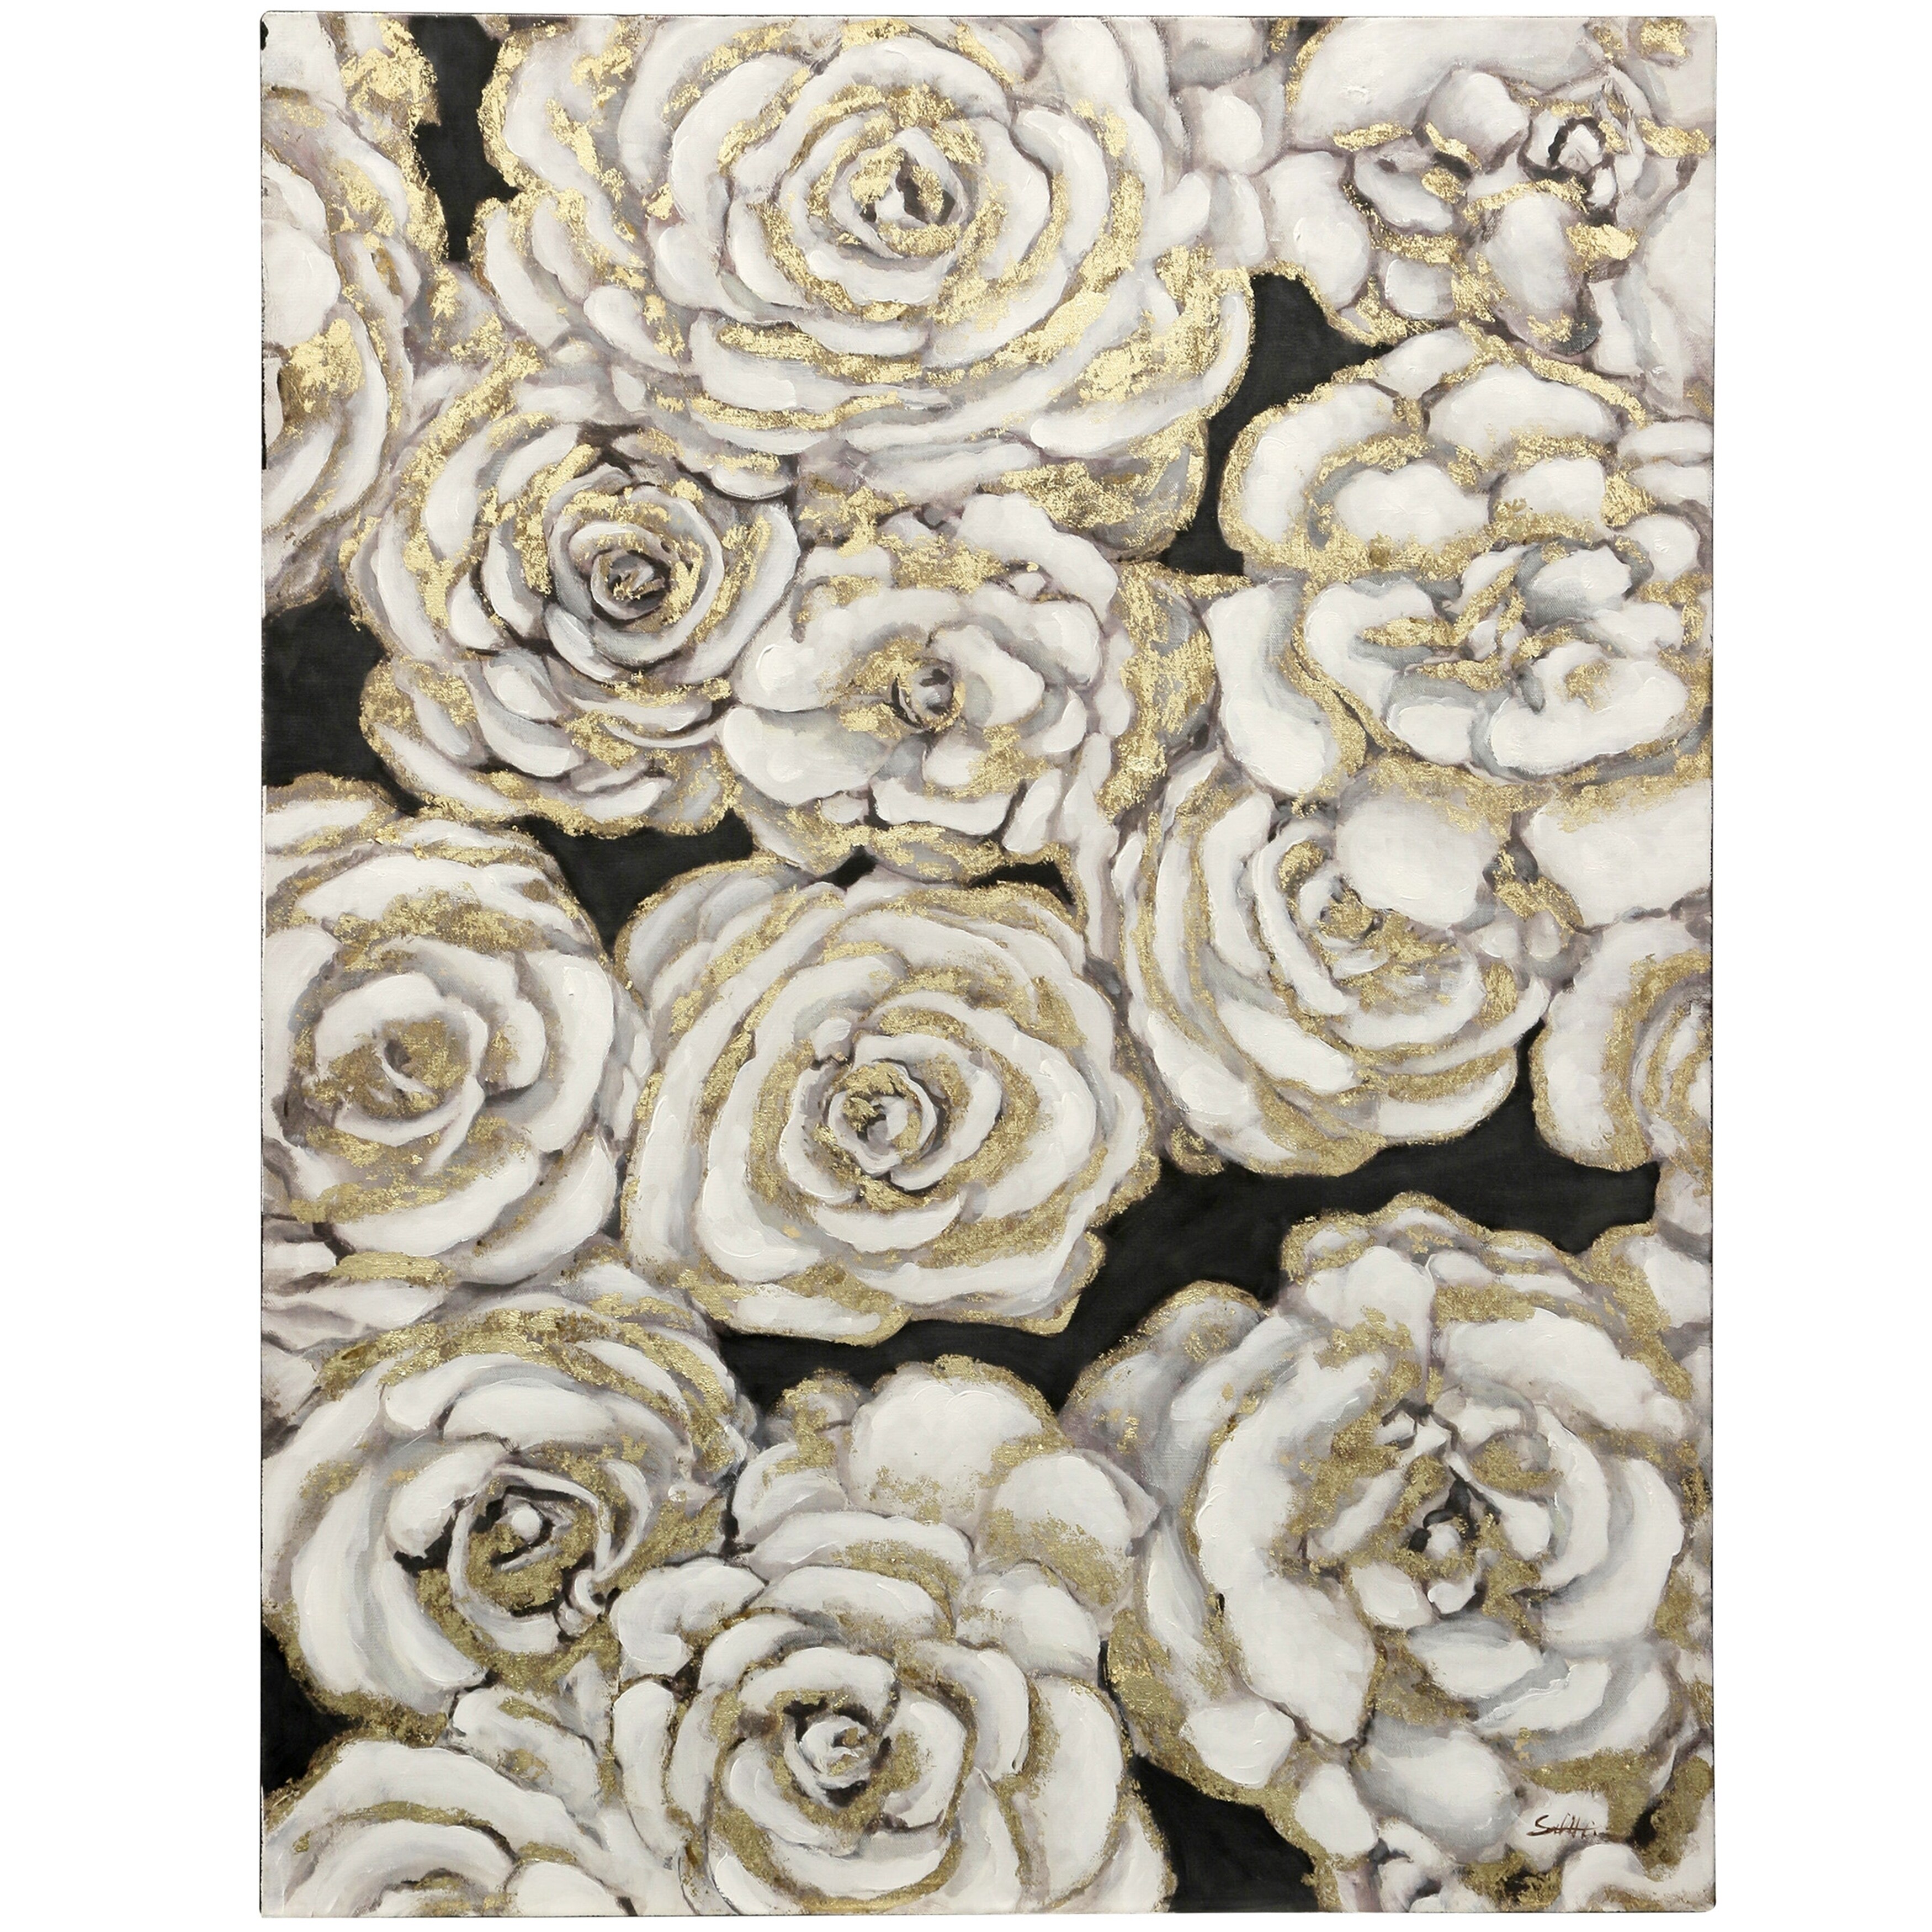 Shop Silver Orchid Hand Painted Roses Wall Art On Sale Overstock 27649419